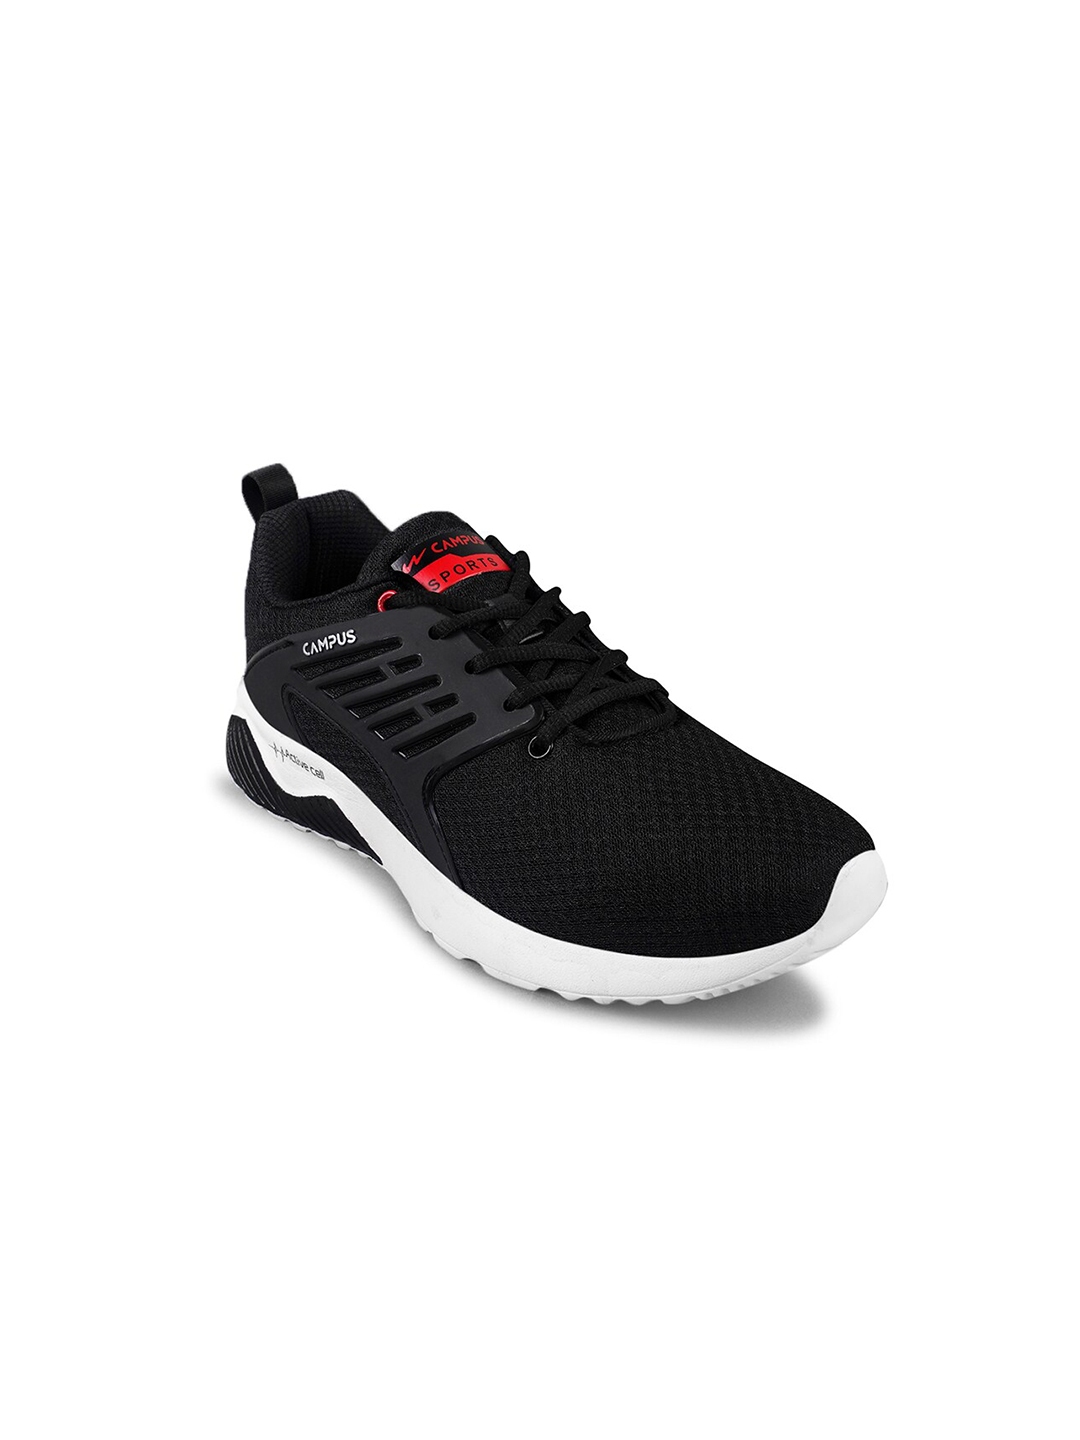 Buy Campus Men CRYSTA PRO Mesh Active Cell Non Marking Running Shoes ...